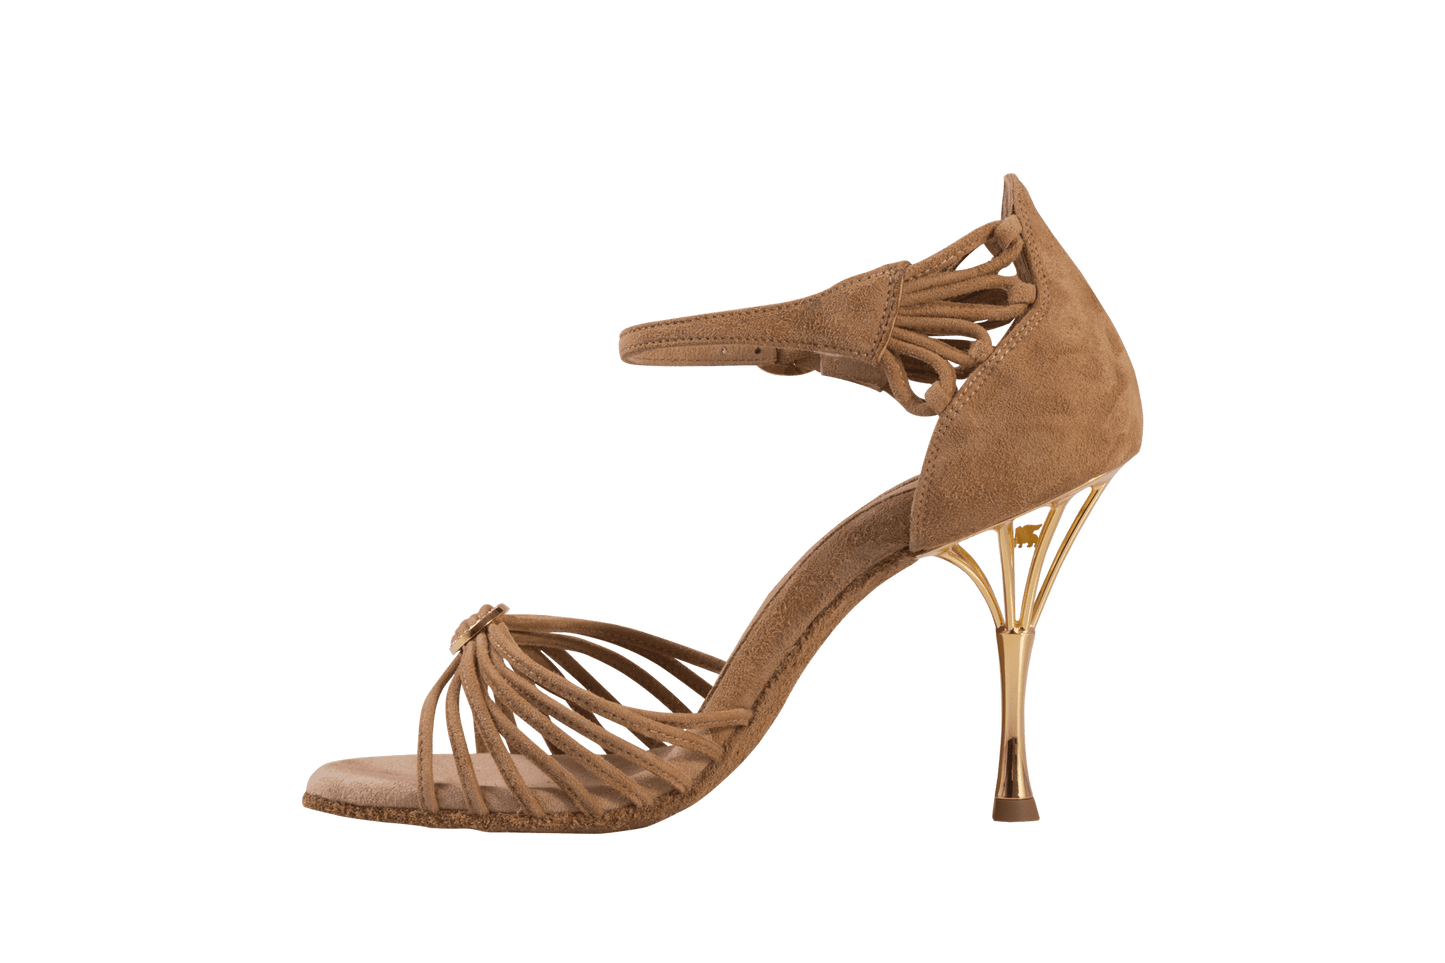 Dance Naturals 883/884 Venere Tan Suede Multi-Strap Latin Shoe with Swarovski Buckles and Flower-Shaped Embellishment on Heel